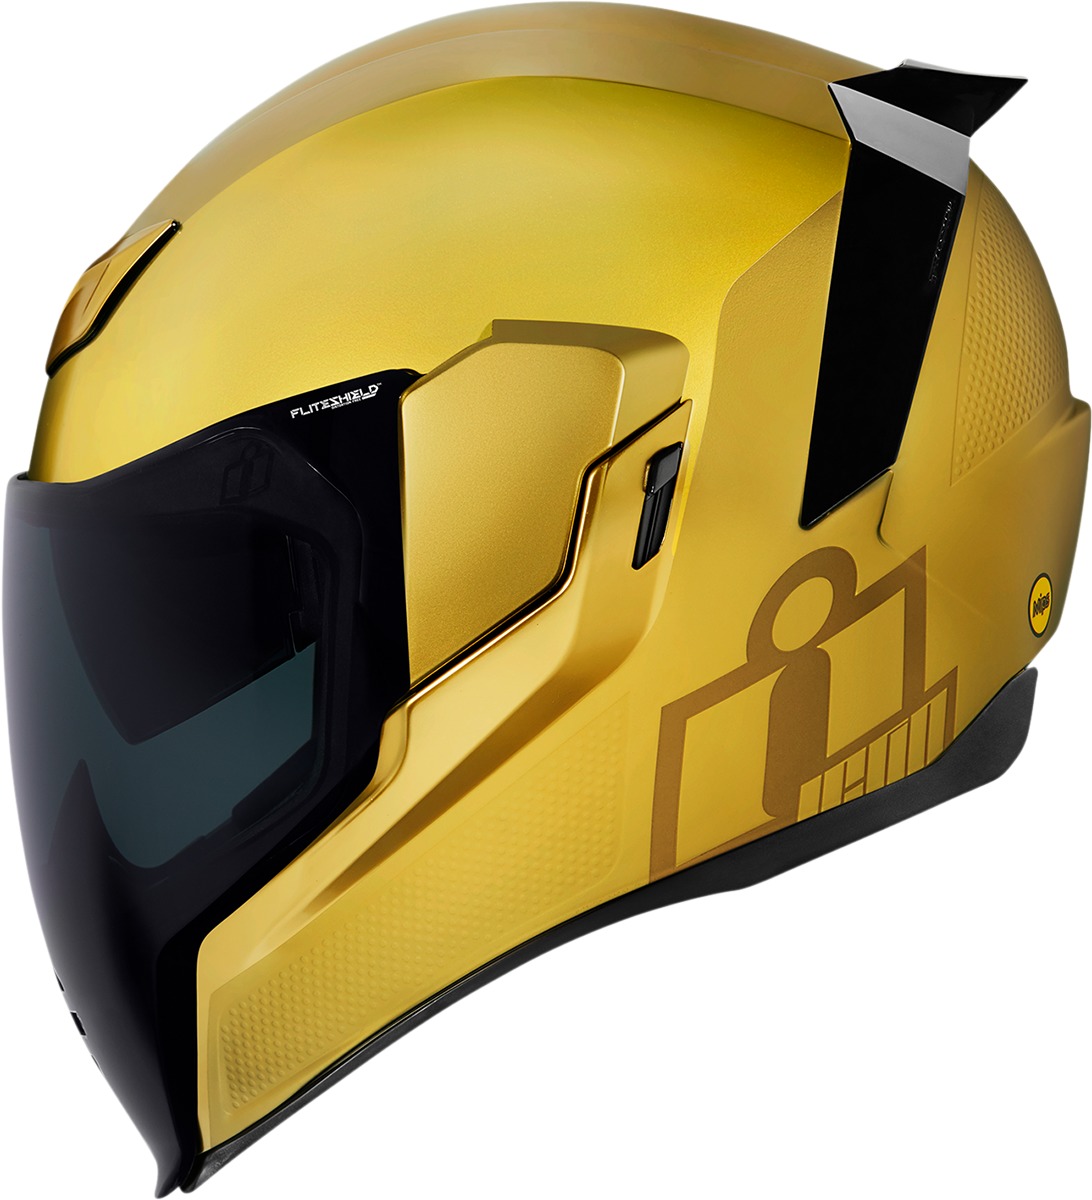 Gold Airflite Jewel MIPS Motorcycle Helmet - Medium - Meets ECE 22.05 and DOT FMVSS-218 Standards - Click Image to Close